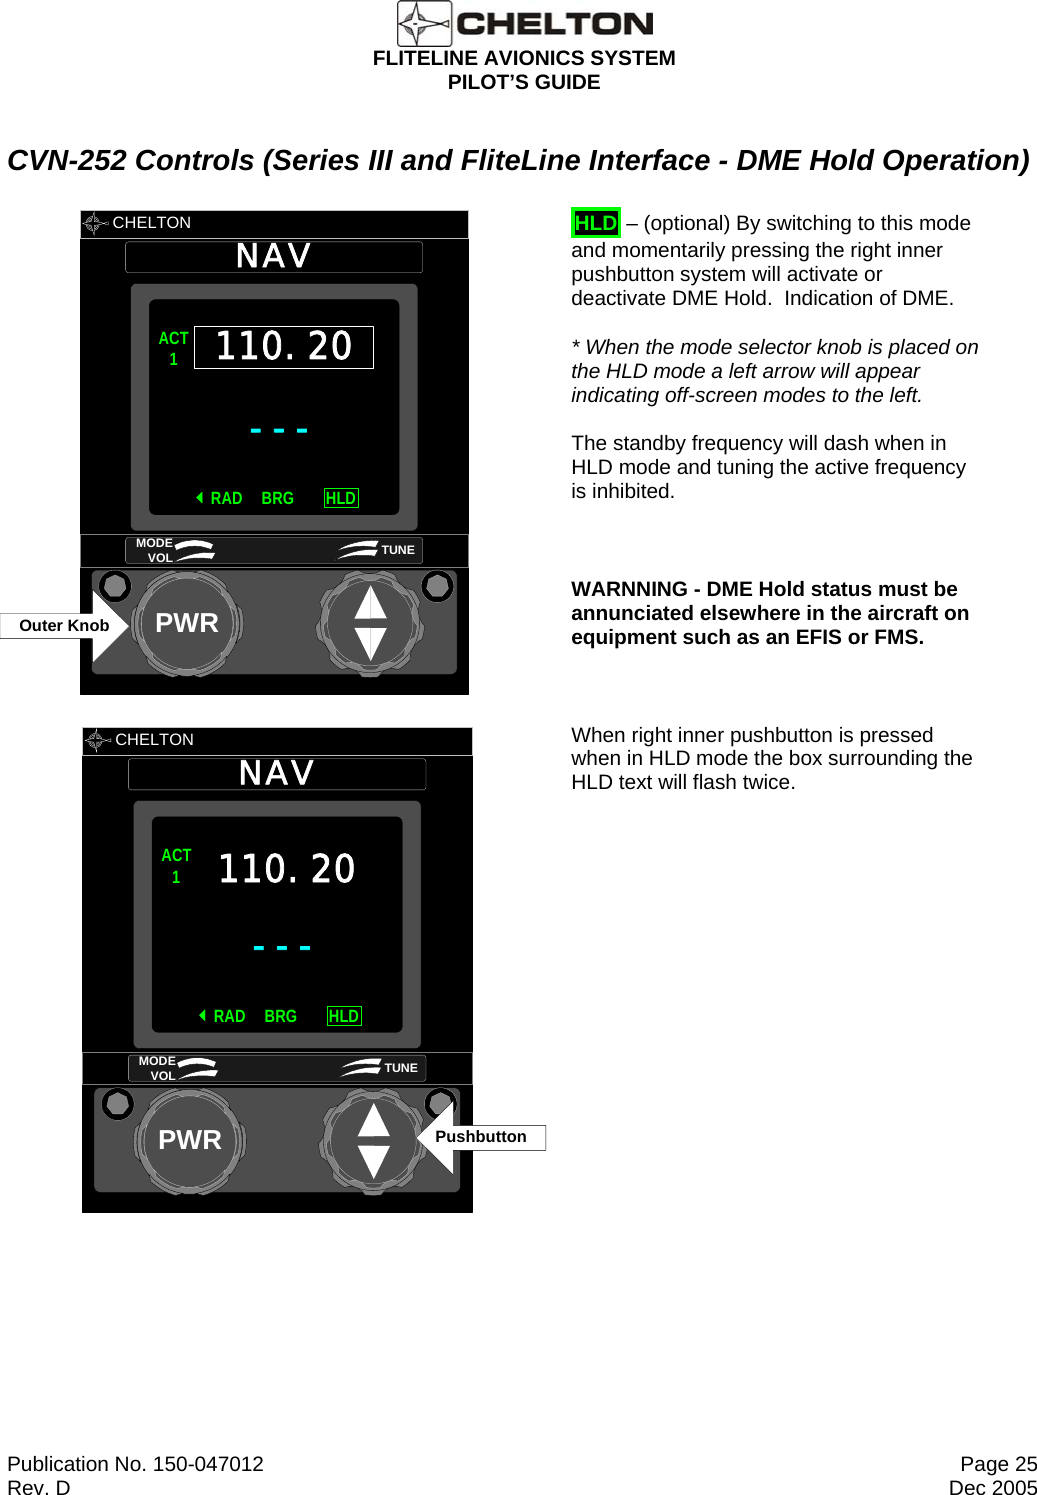  FLITELINE AVIONICS SYSTEM PILOT’S GUIDE  Publication No. 150-047012  Page 25 Rev. D  Dec 2005 CVN-252 Controls (Series III and FliteLine Interface - DME Hold Operation)       CHELTON NAVPWR---ACT1RAD HLDBRG110.20MODE VOL TUNEOuter Knob       HLD – (optional) By switching to this mode and momentarily pressing the right inner pushbutton system will activate or deactivate DME Hold.  Indication of DME.    * When the mode selector knob is placed on the HLD mode a left arrow will appear indicating off-screen modes to the left. The standby frequency will dash when in HLD mode and tuning the active frequency is inhibited.  WARNNING - DME Hold status must be annunciated elsewhere in the aircraft on equipment such as an EFIS or FMS.        CHELTON NAVPWR---ACT1RAD HLDBRG110.20MODE VOL TUNEPushbuttonWhen right inner pushbutton is pressed when in HLD mode the box surrounding the HLD text will flash twice. 